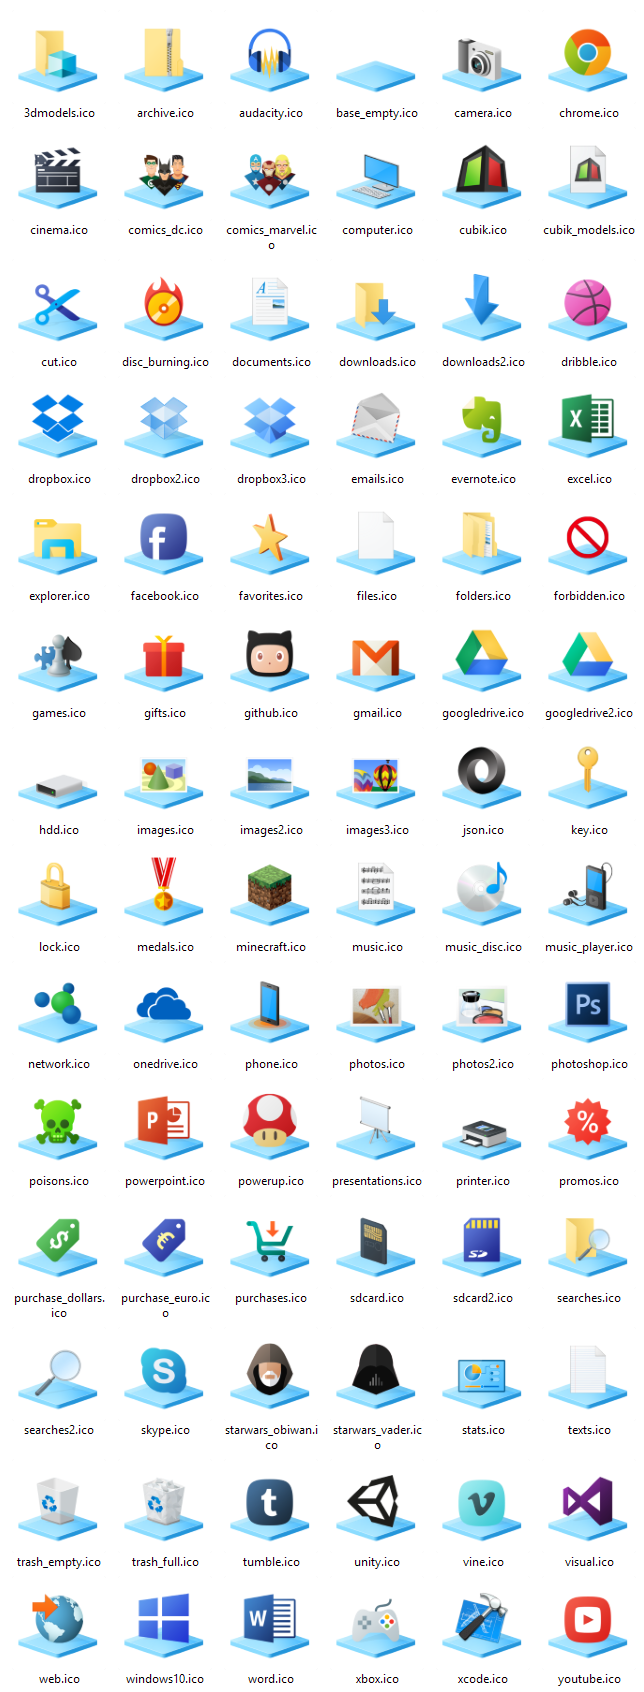 Windows 8.1 icons Preview by dtafalonso 